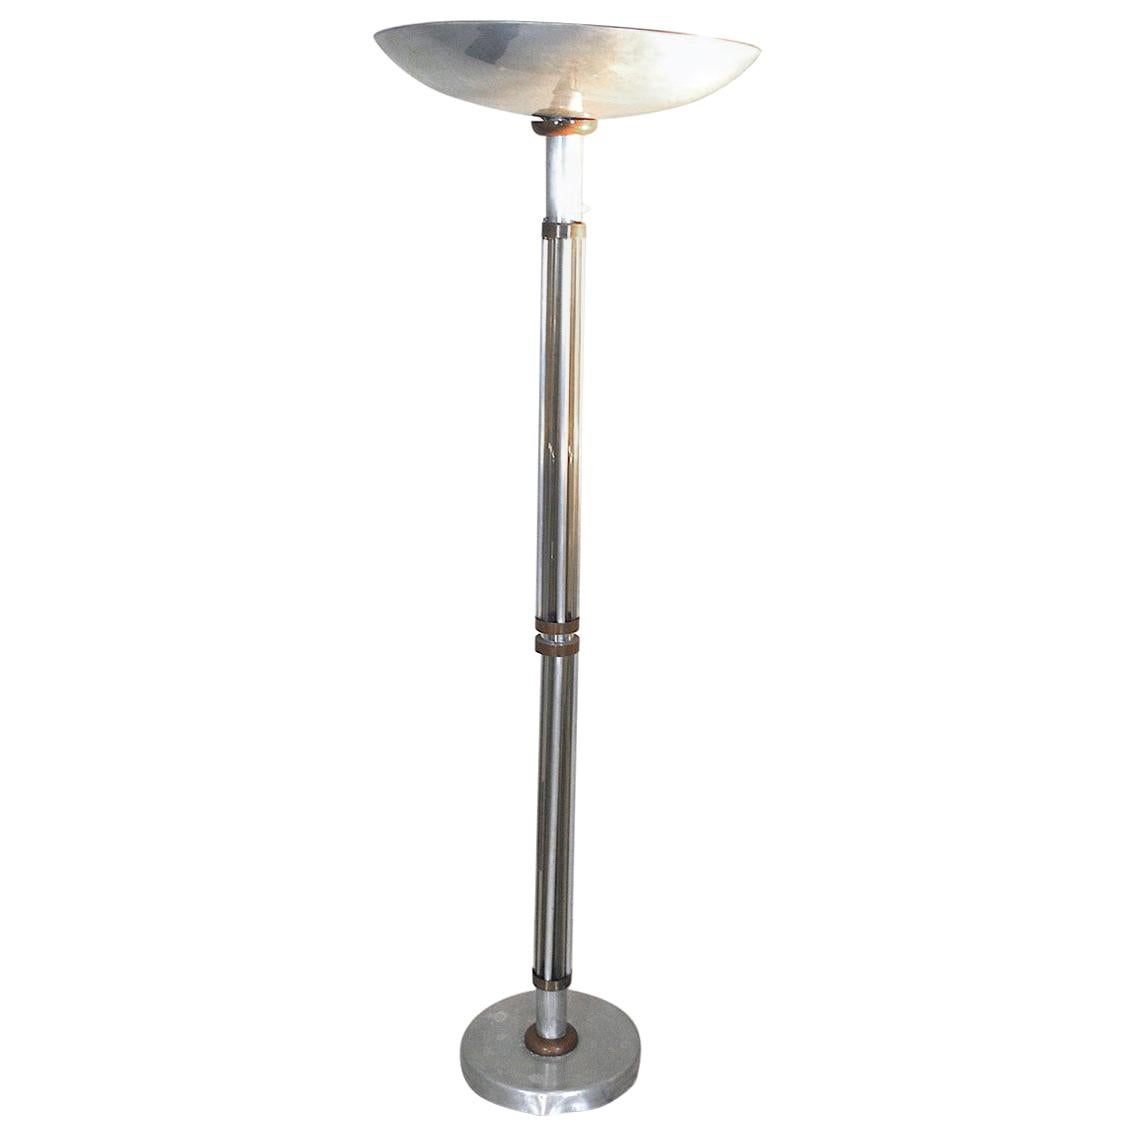 1940s French Floor Lamp Made of Glass and Copper Metal For Sale